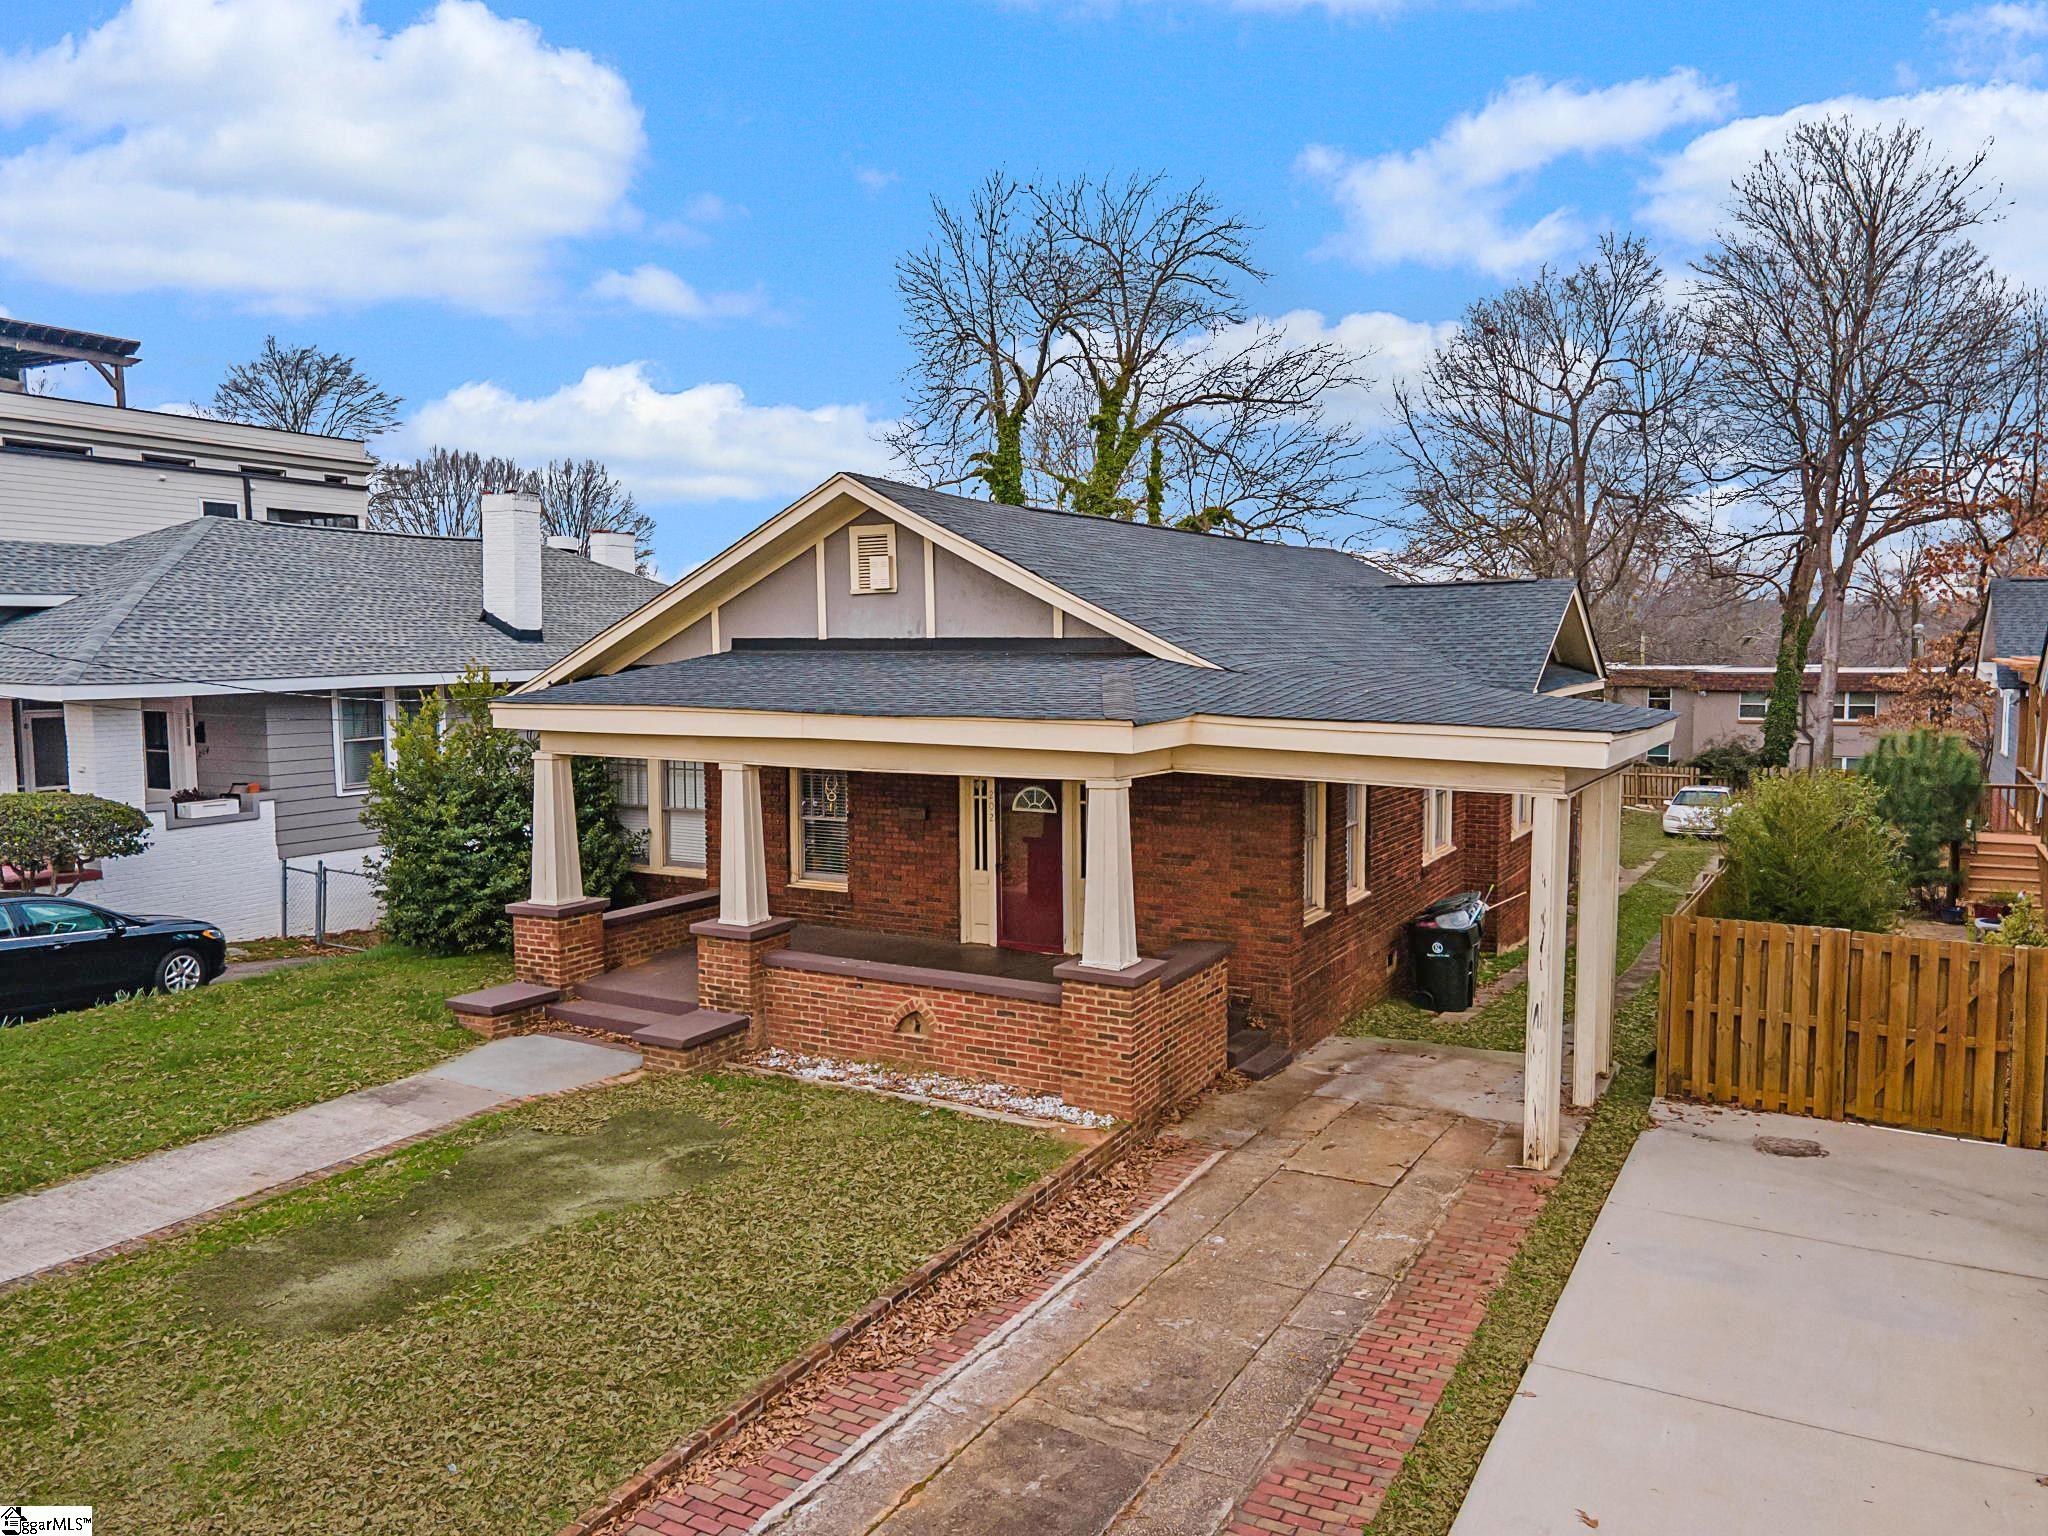 202 Perry, Greenville, SC 29601